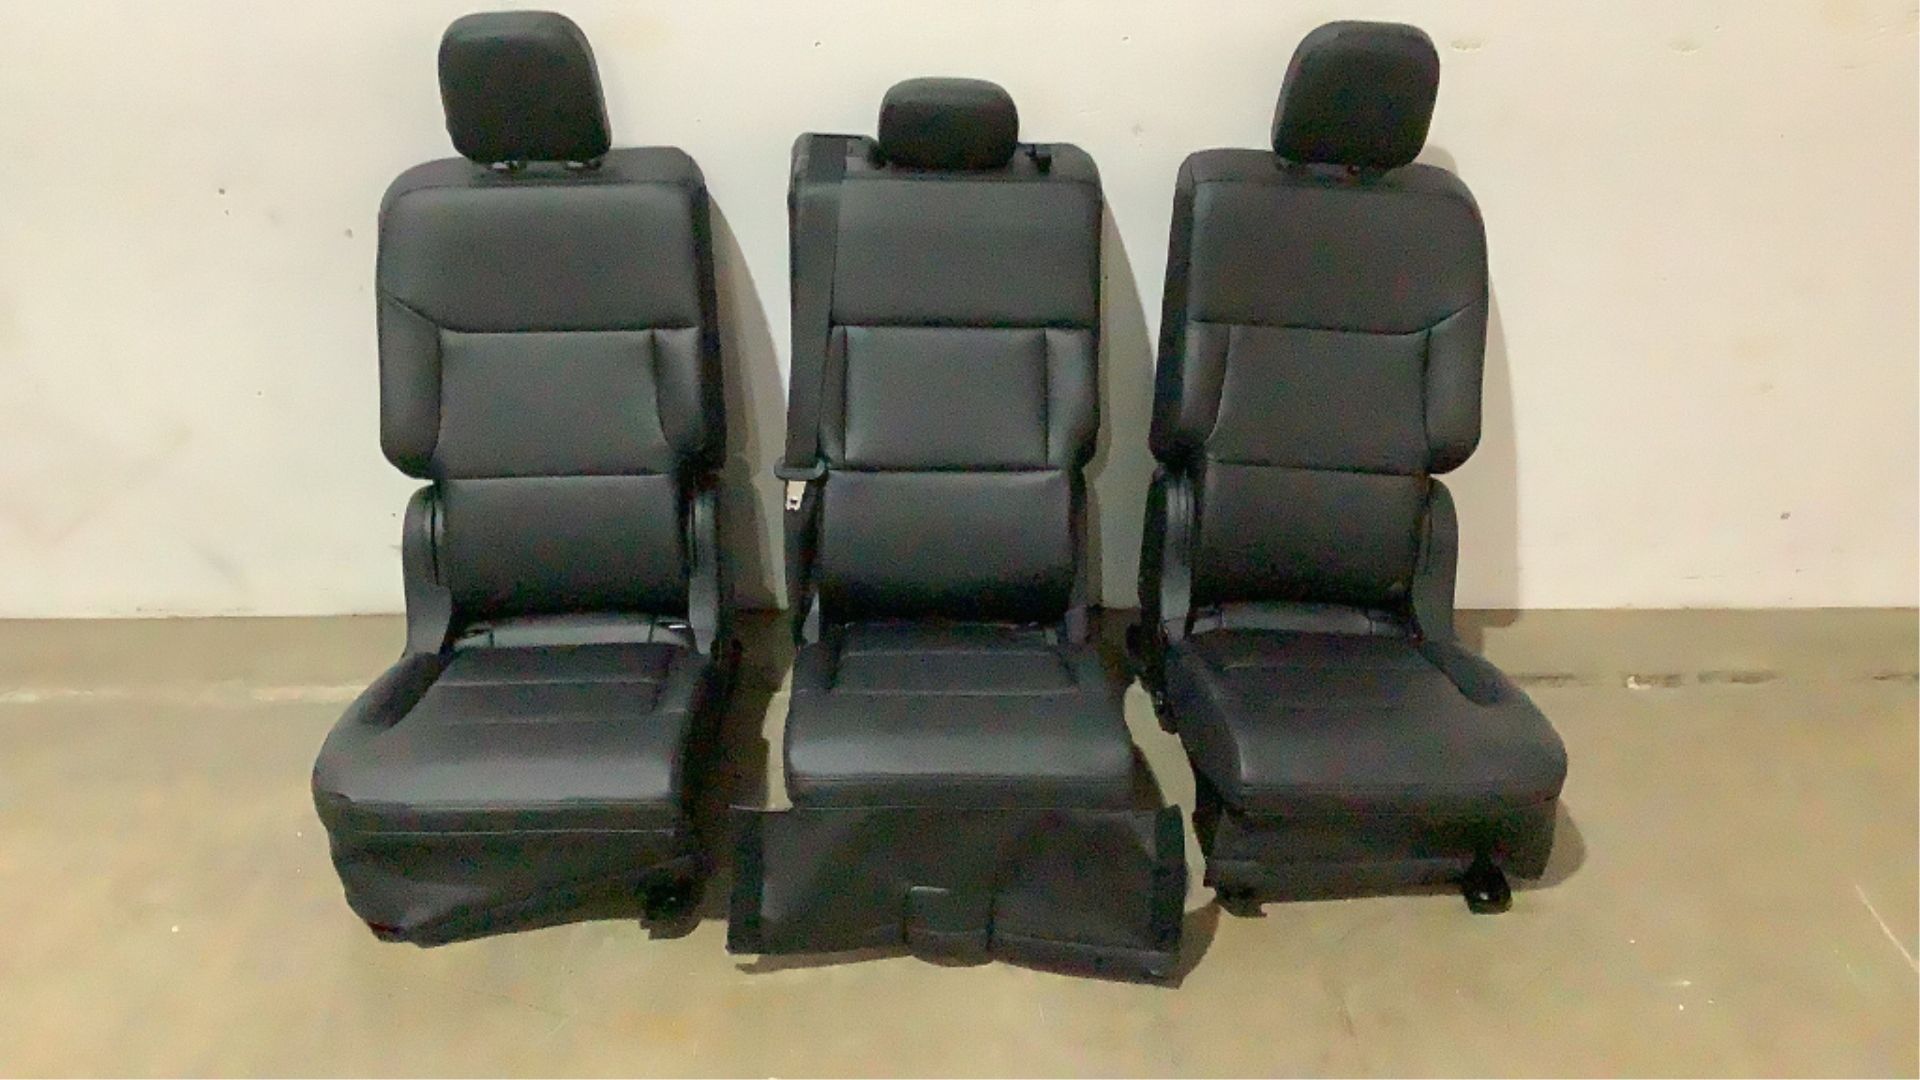 2020 Ford Explorer Set of Rear Seats - Image 4 of 12